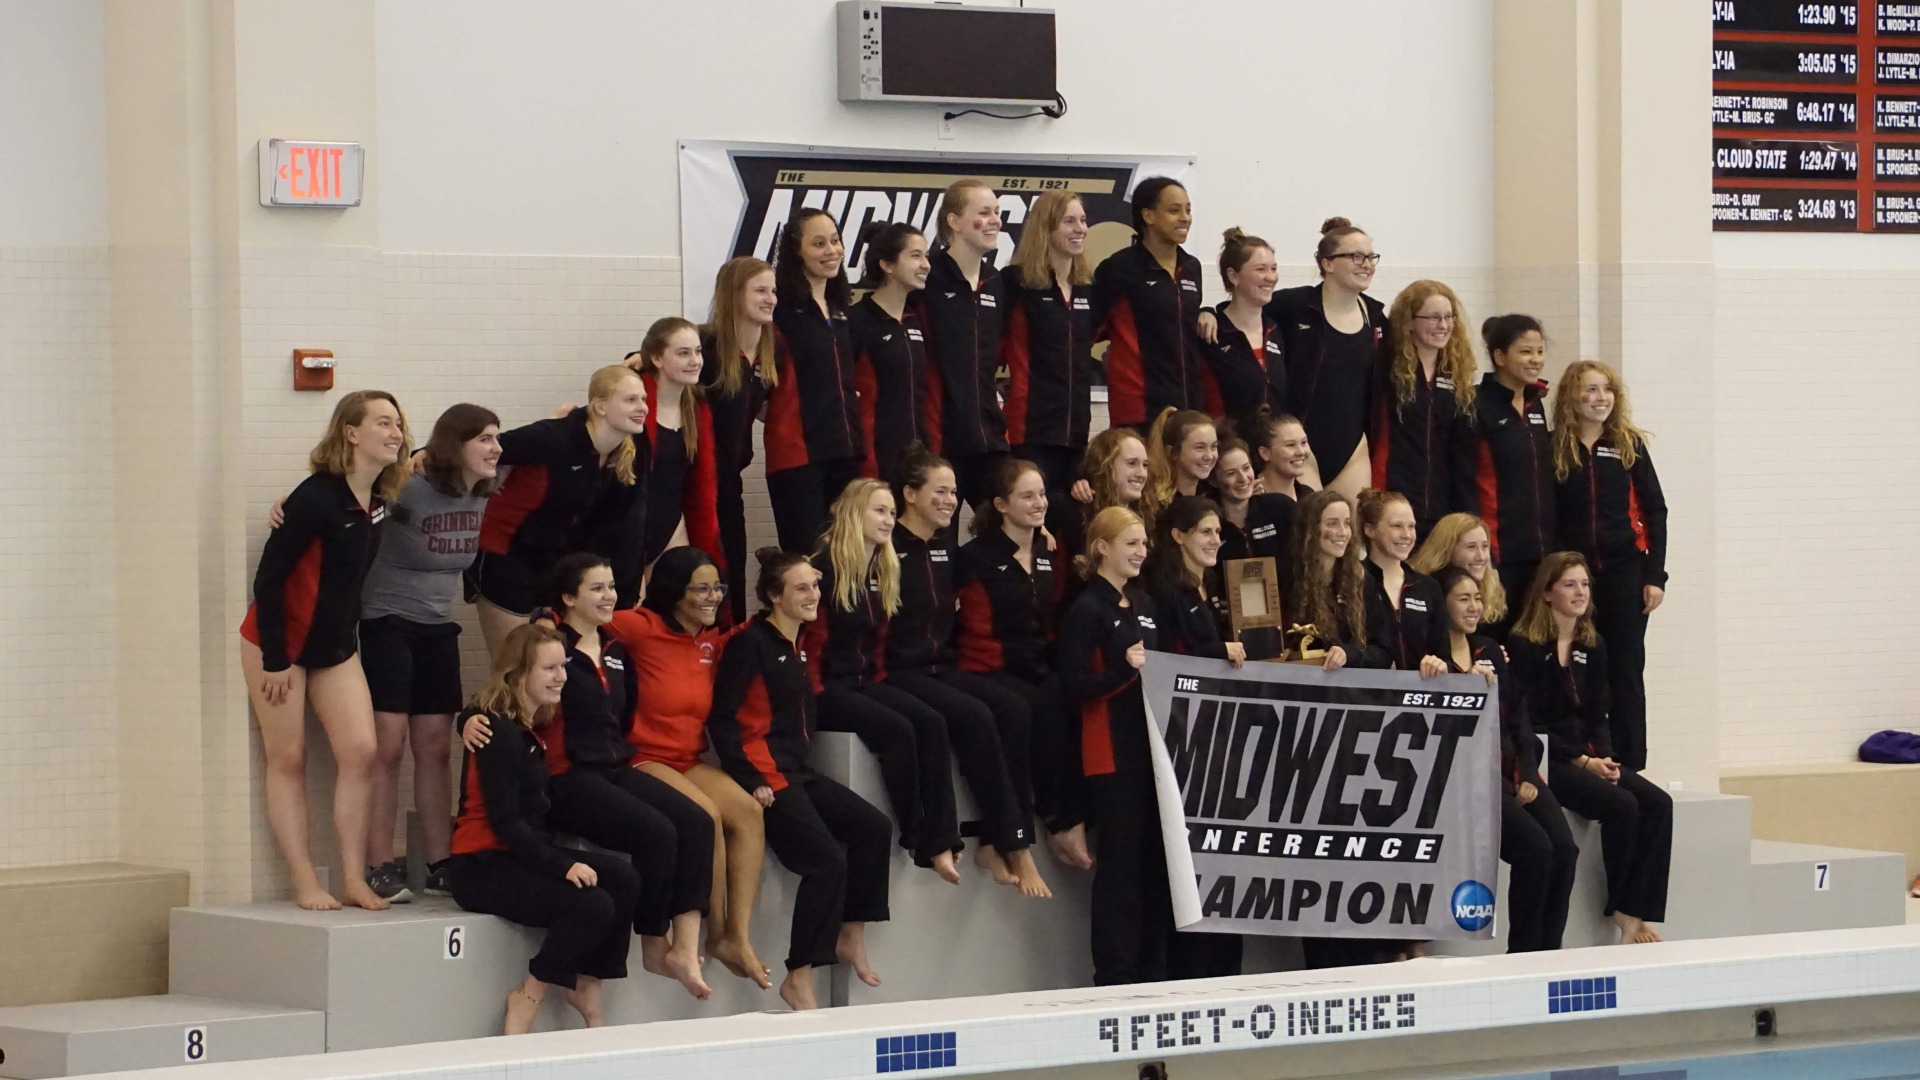 Midwest champion Grinnell College team in uniforms